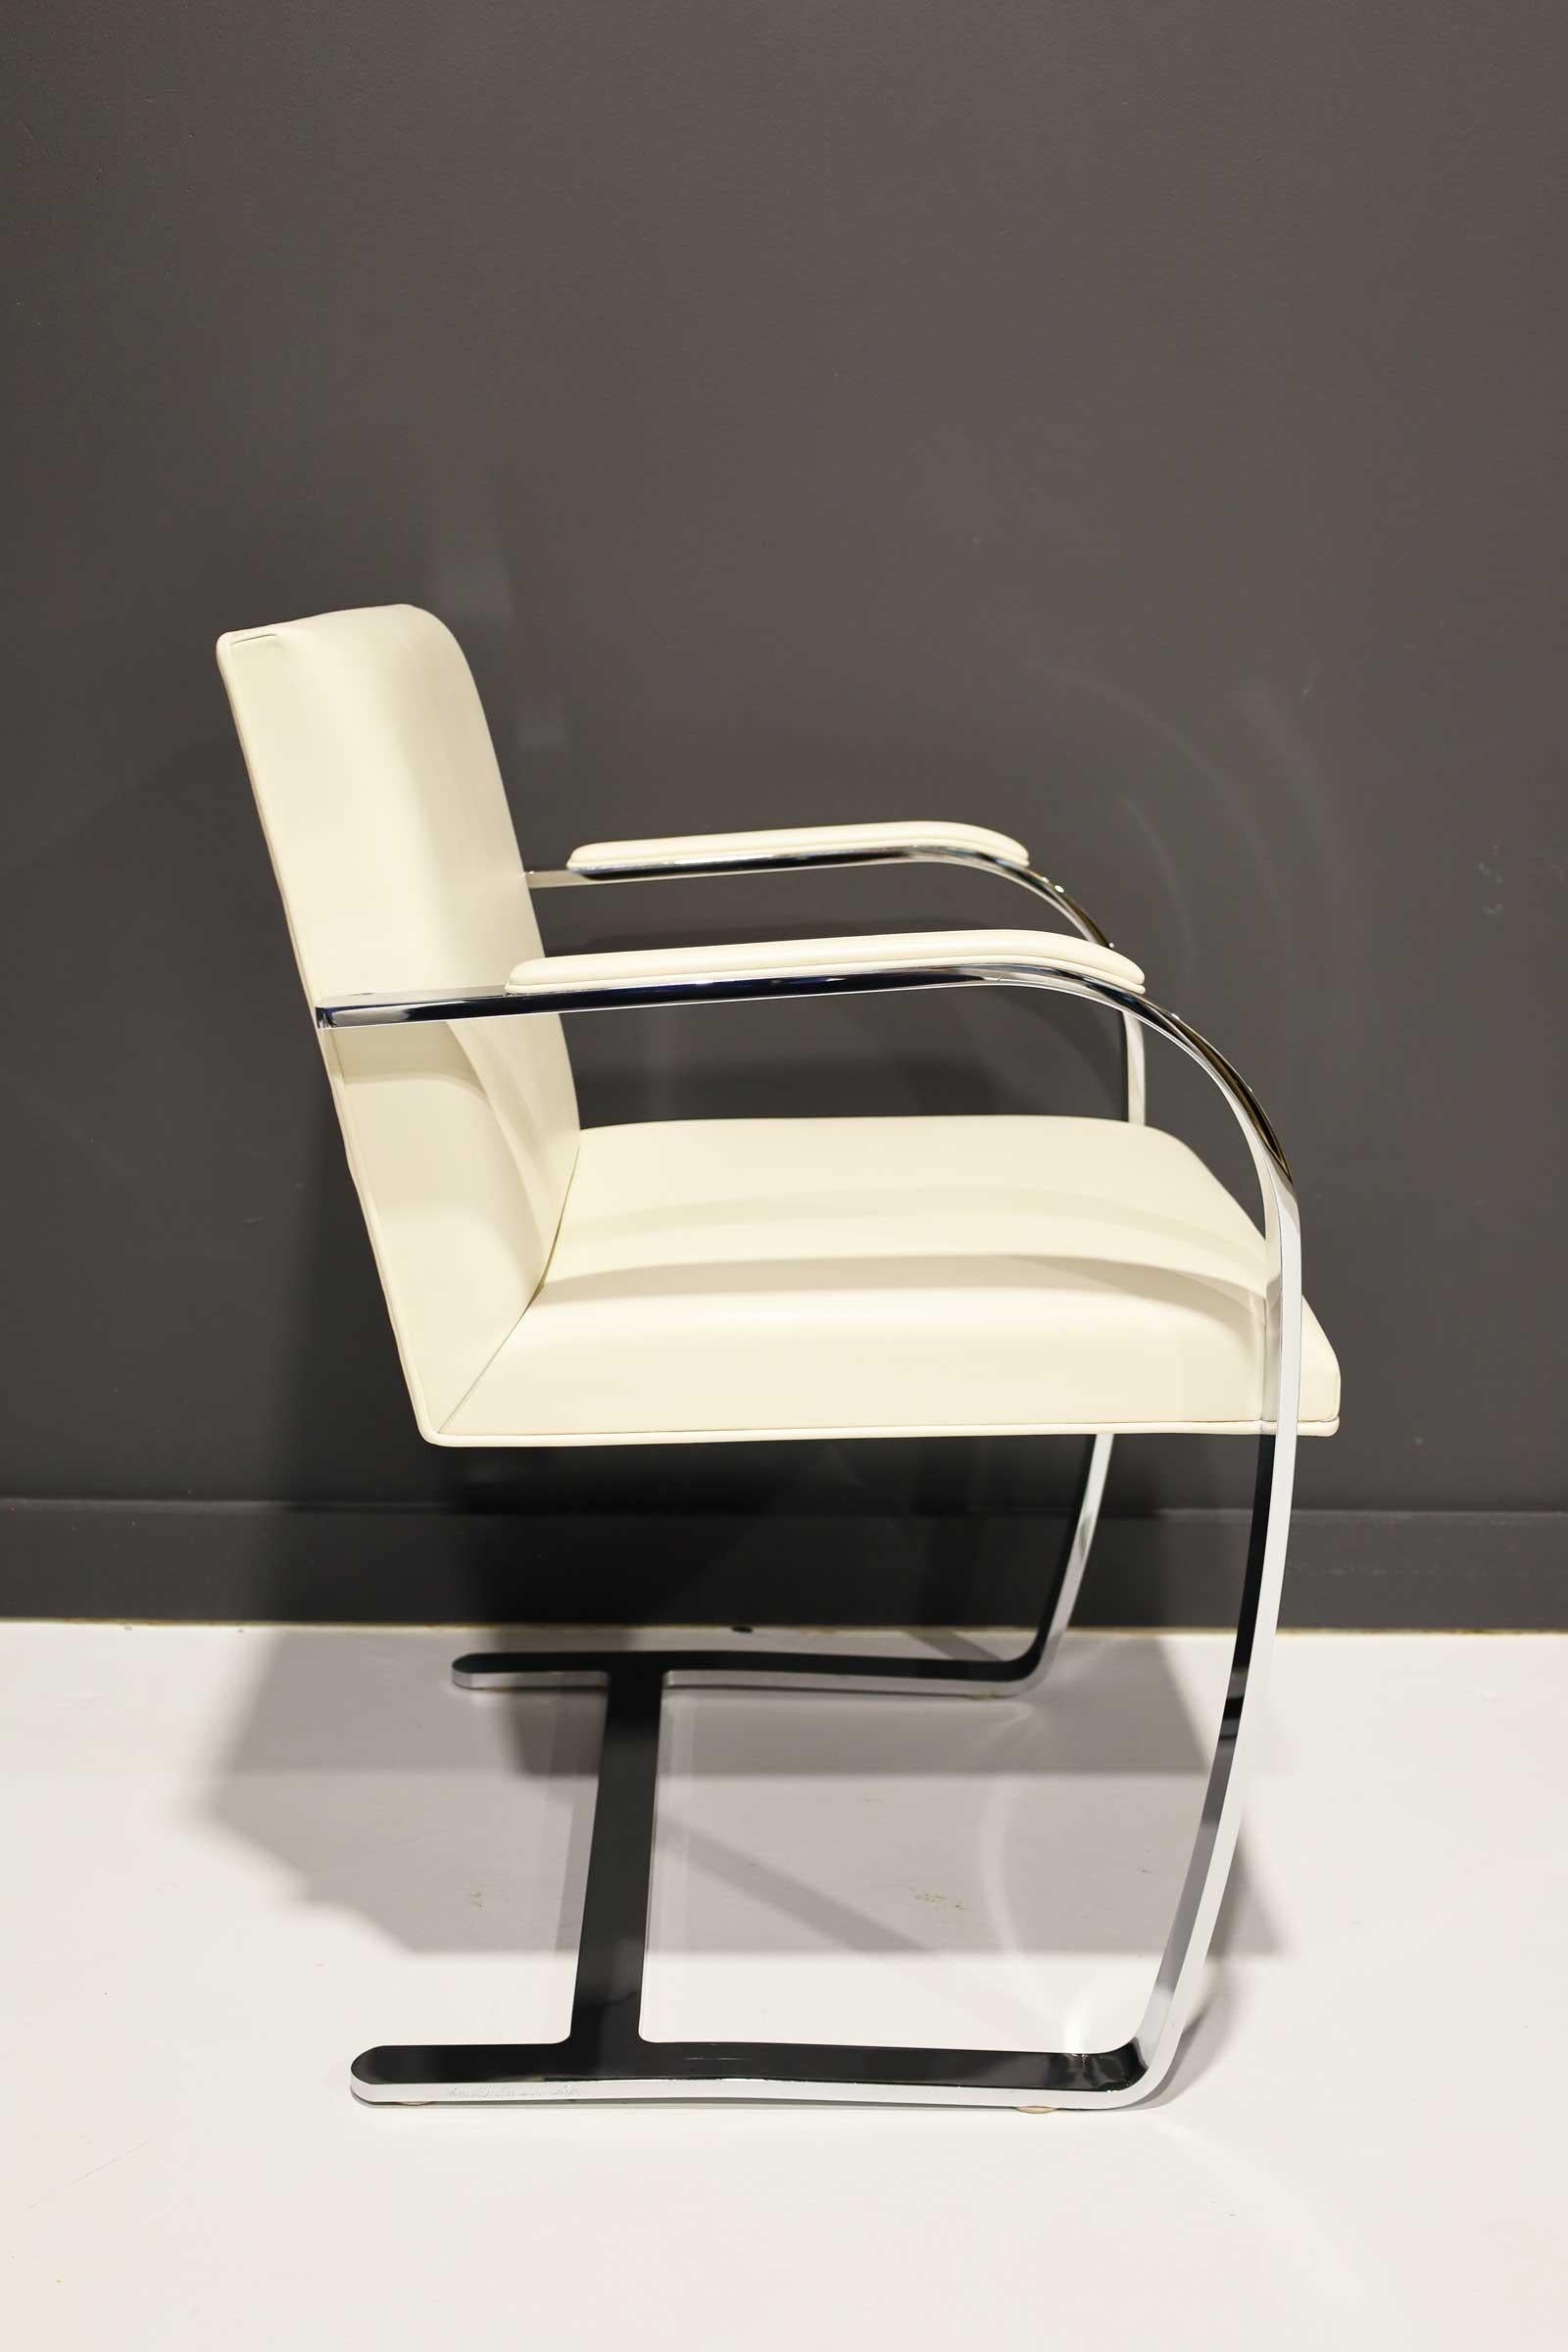 American Mies van der Rohe Stainless Steel Brno Chairs by Knoll in Sabrina Leather